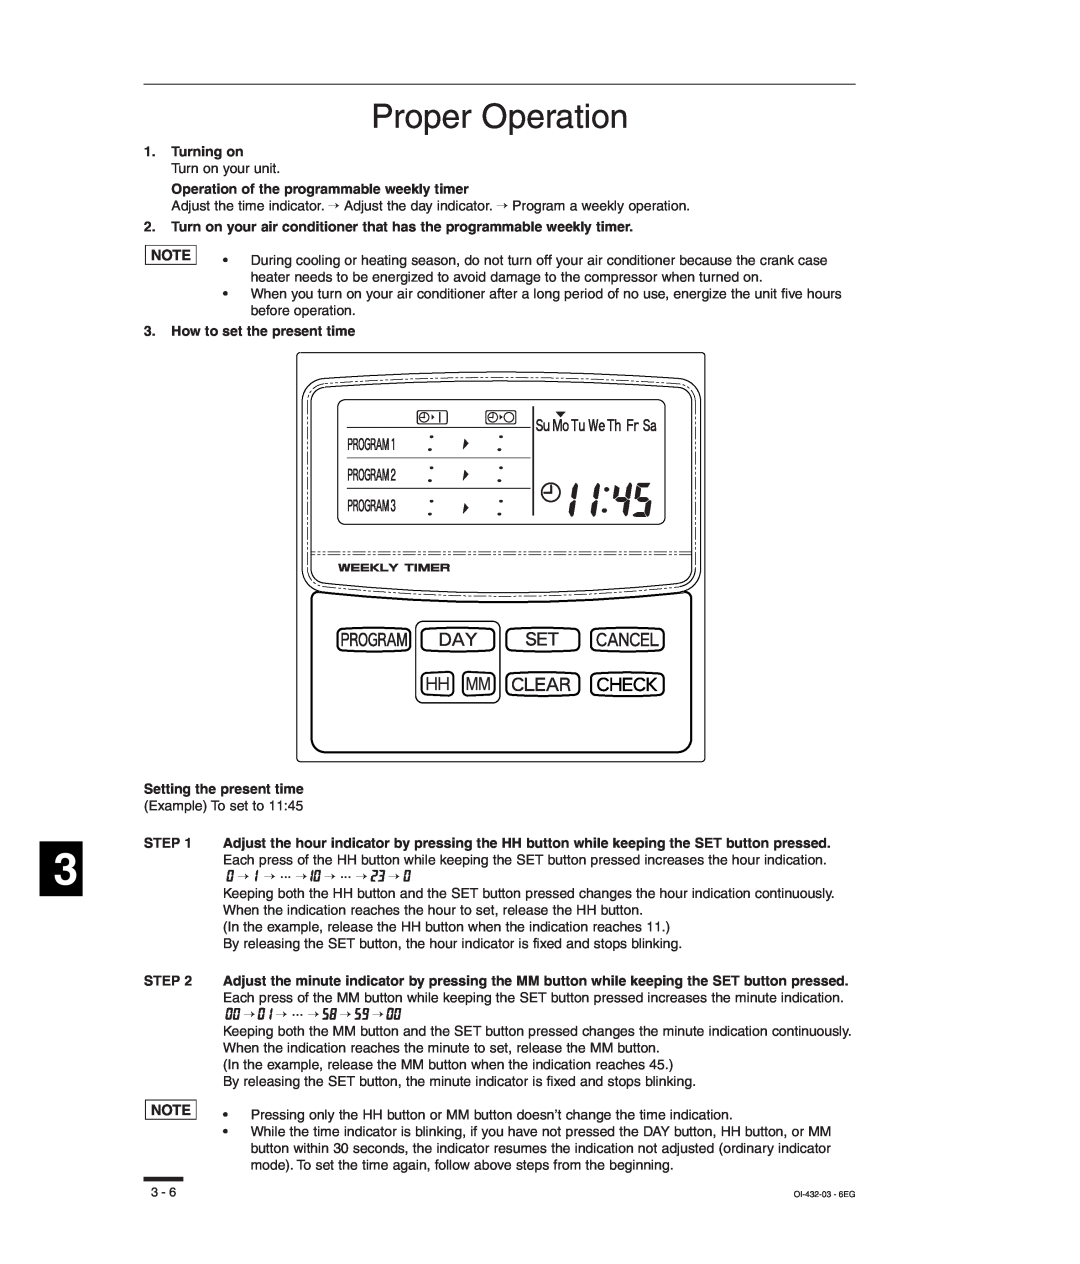 Sanyo TM-SH80UG Proper Operation, Turning on, Operation of the programmable weekly timer, How to set the present time 